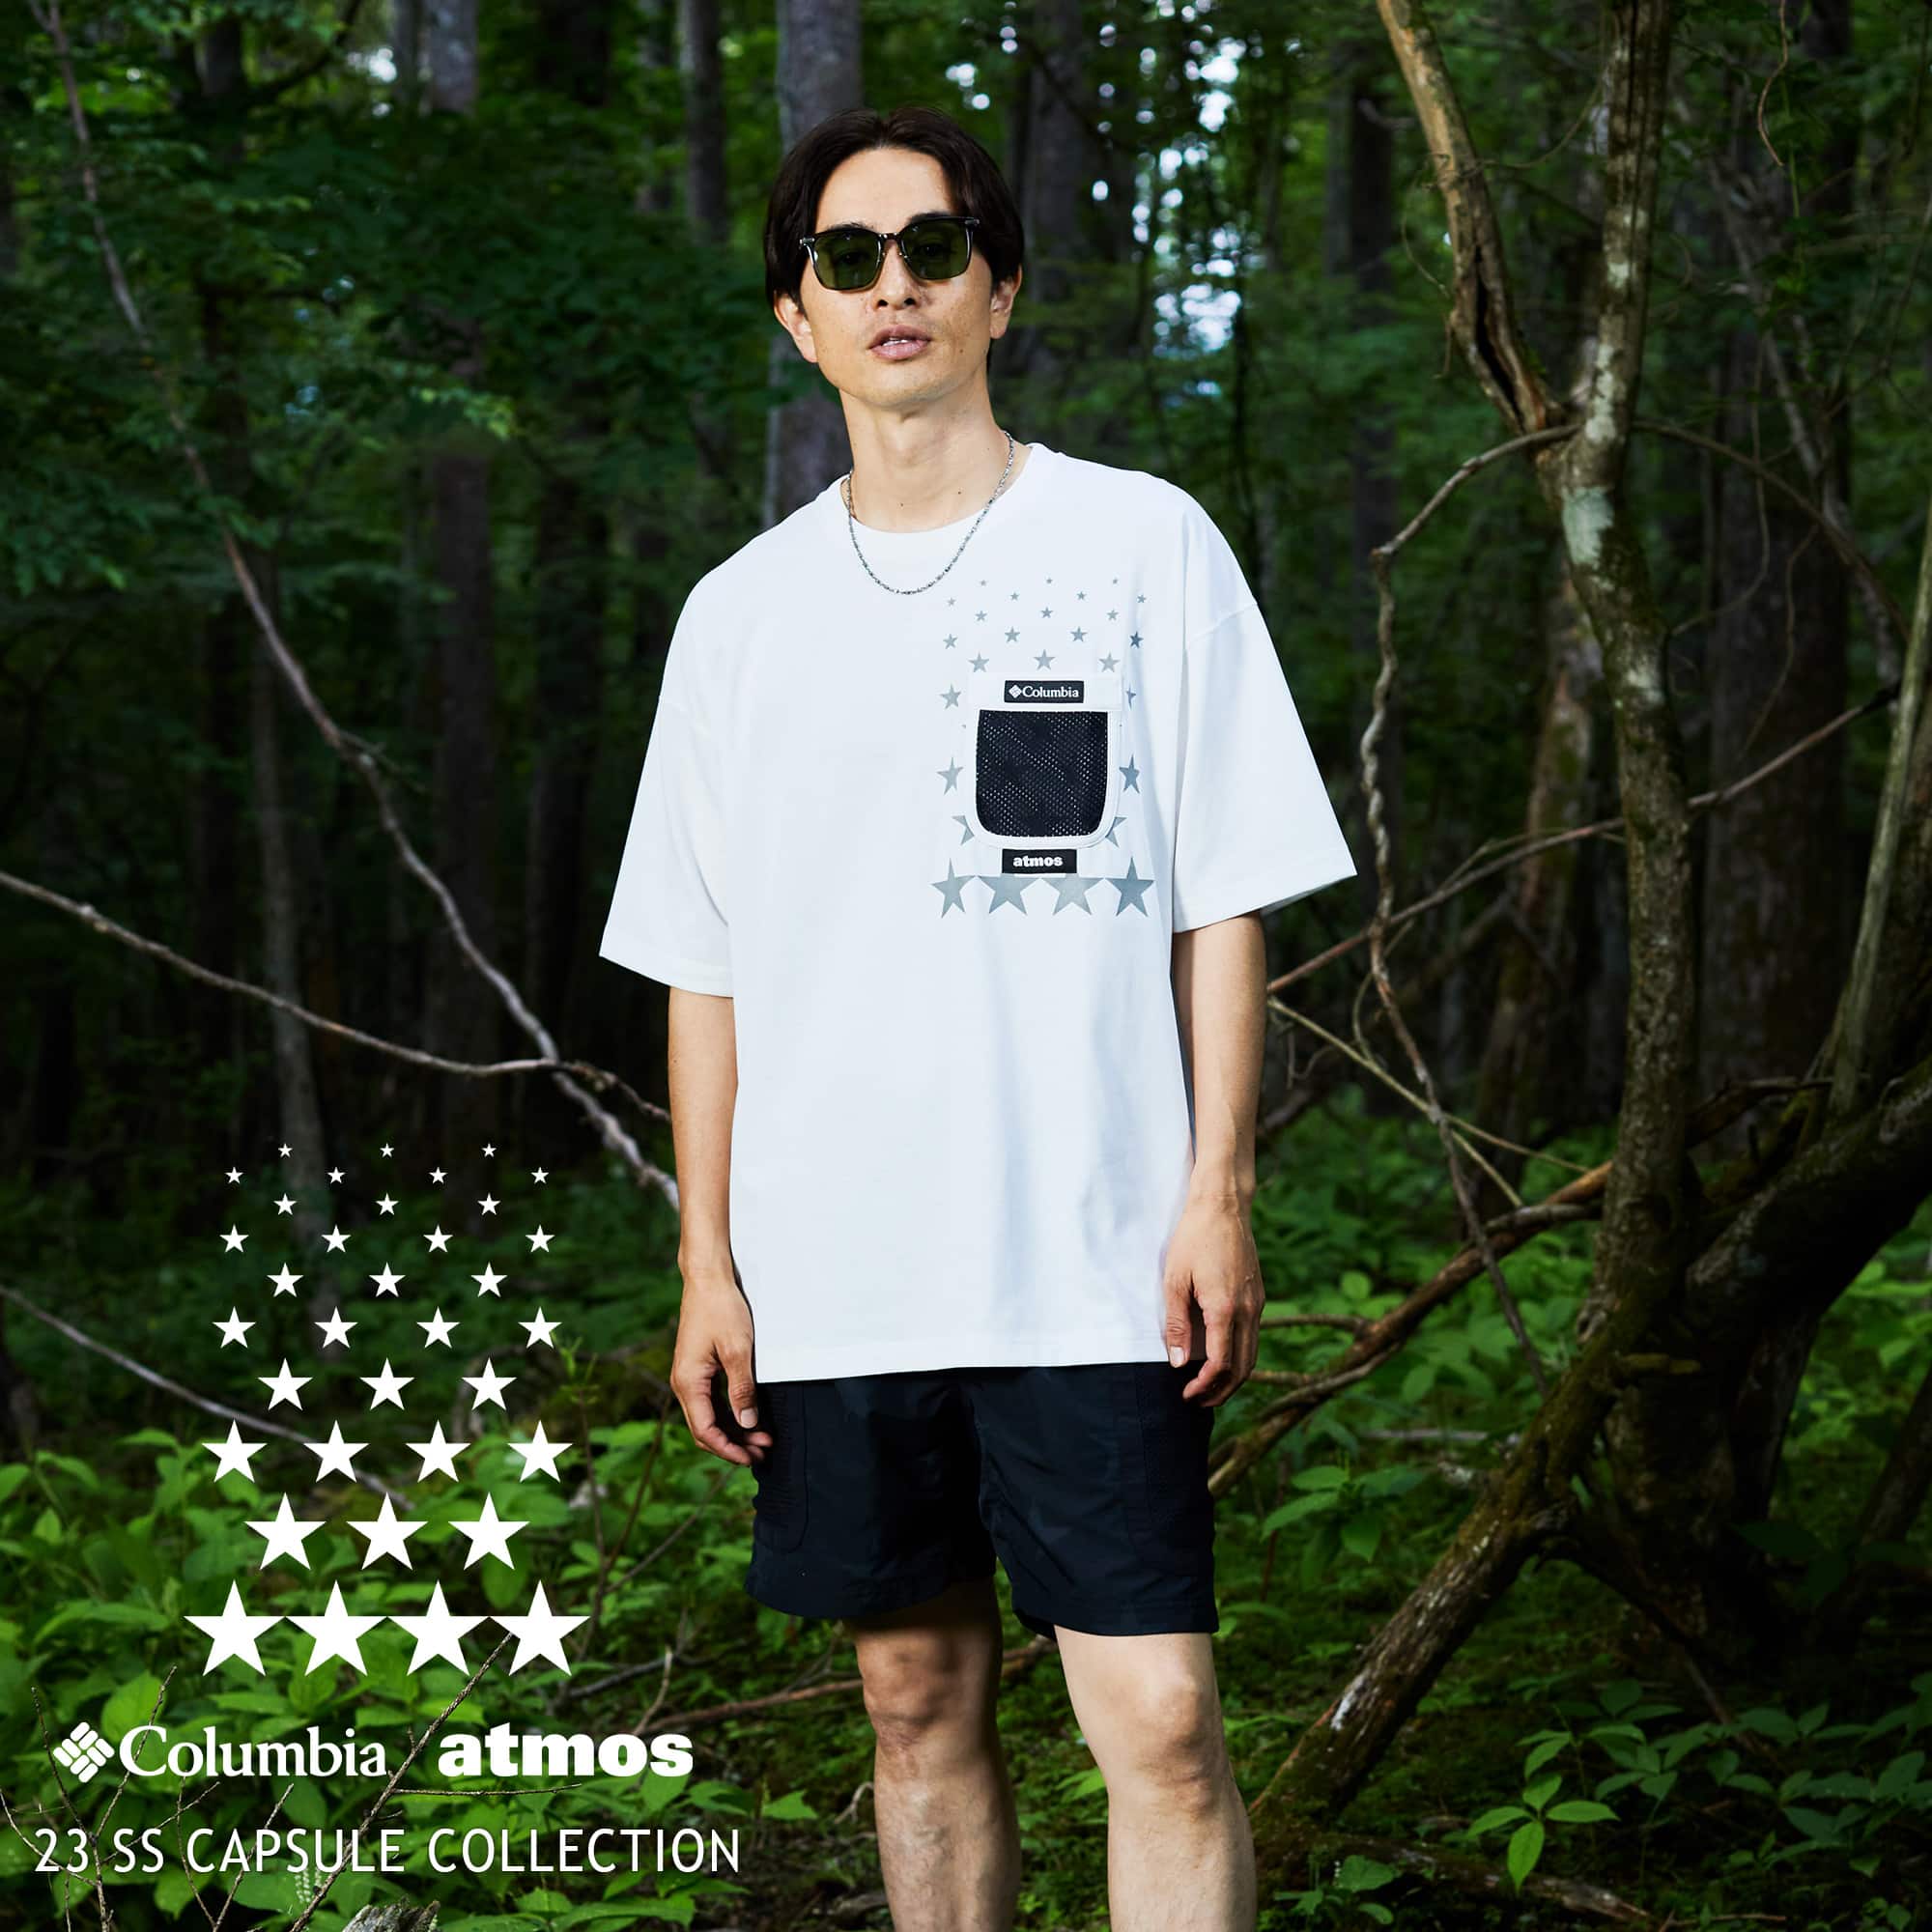 Columbia × atmos 23 SUMMER CAPSULE COLLECTION